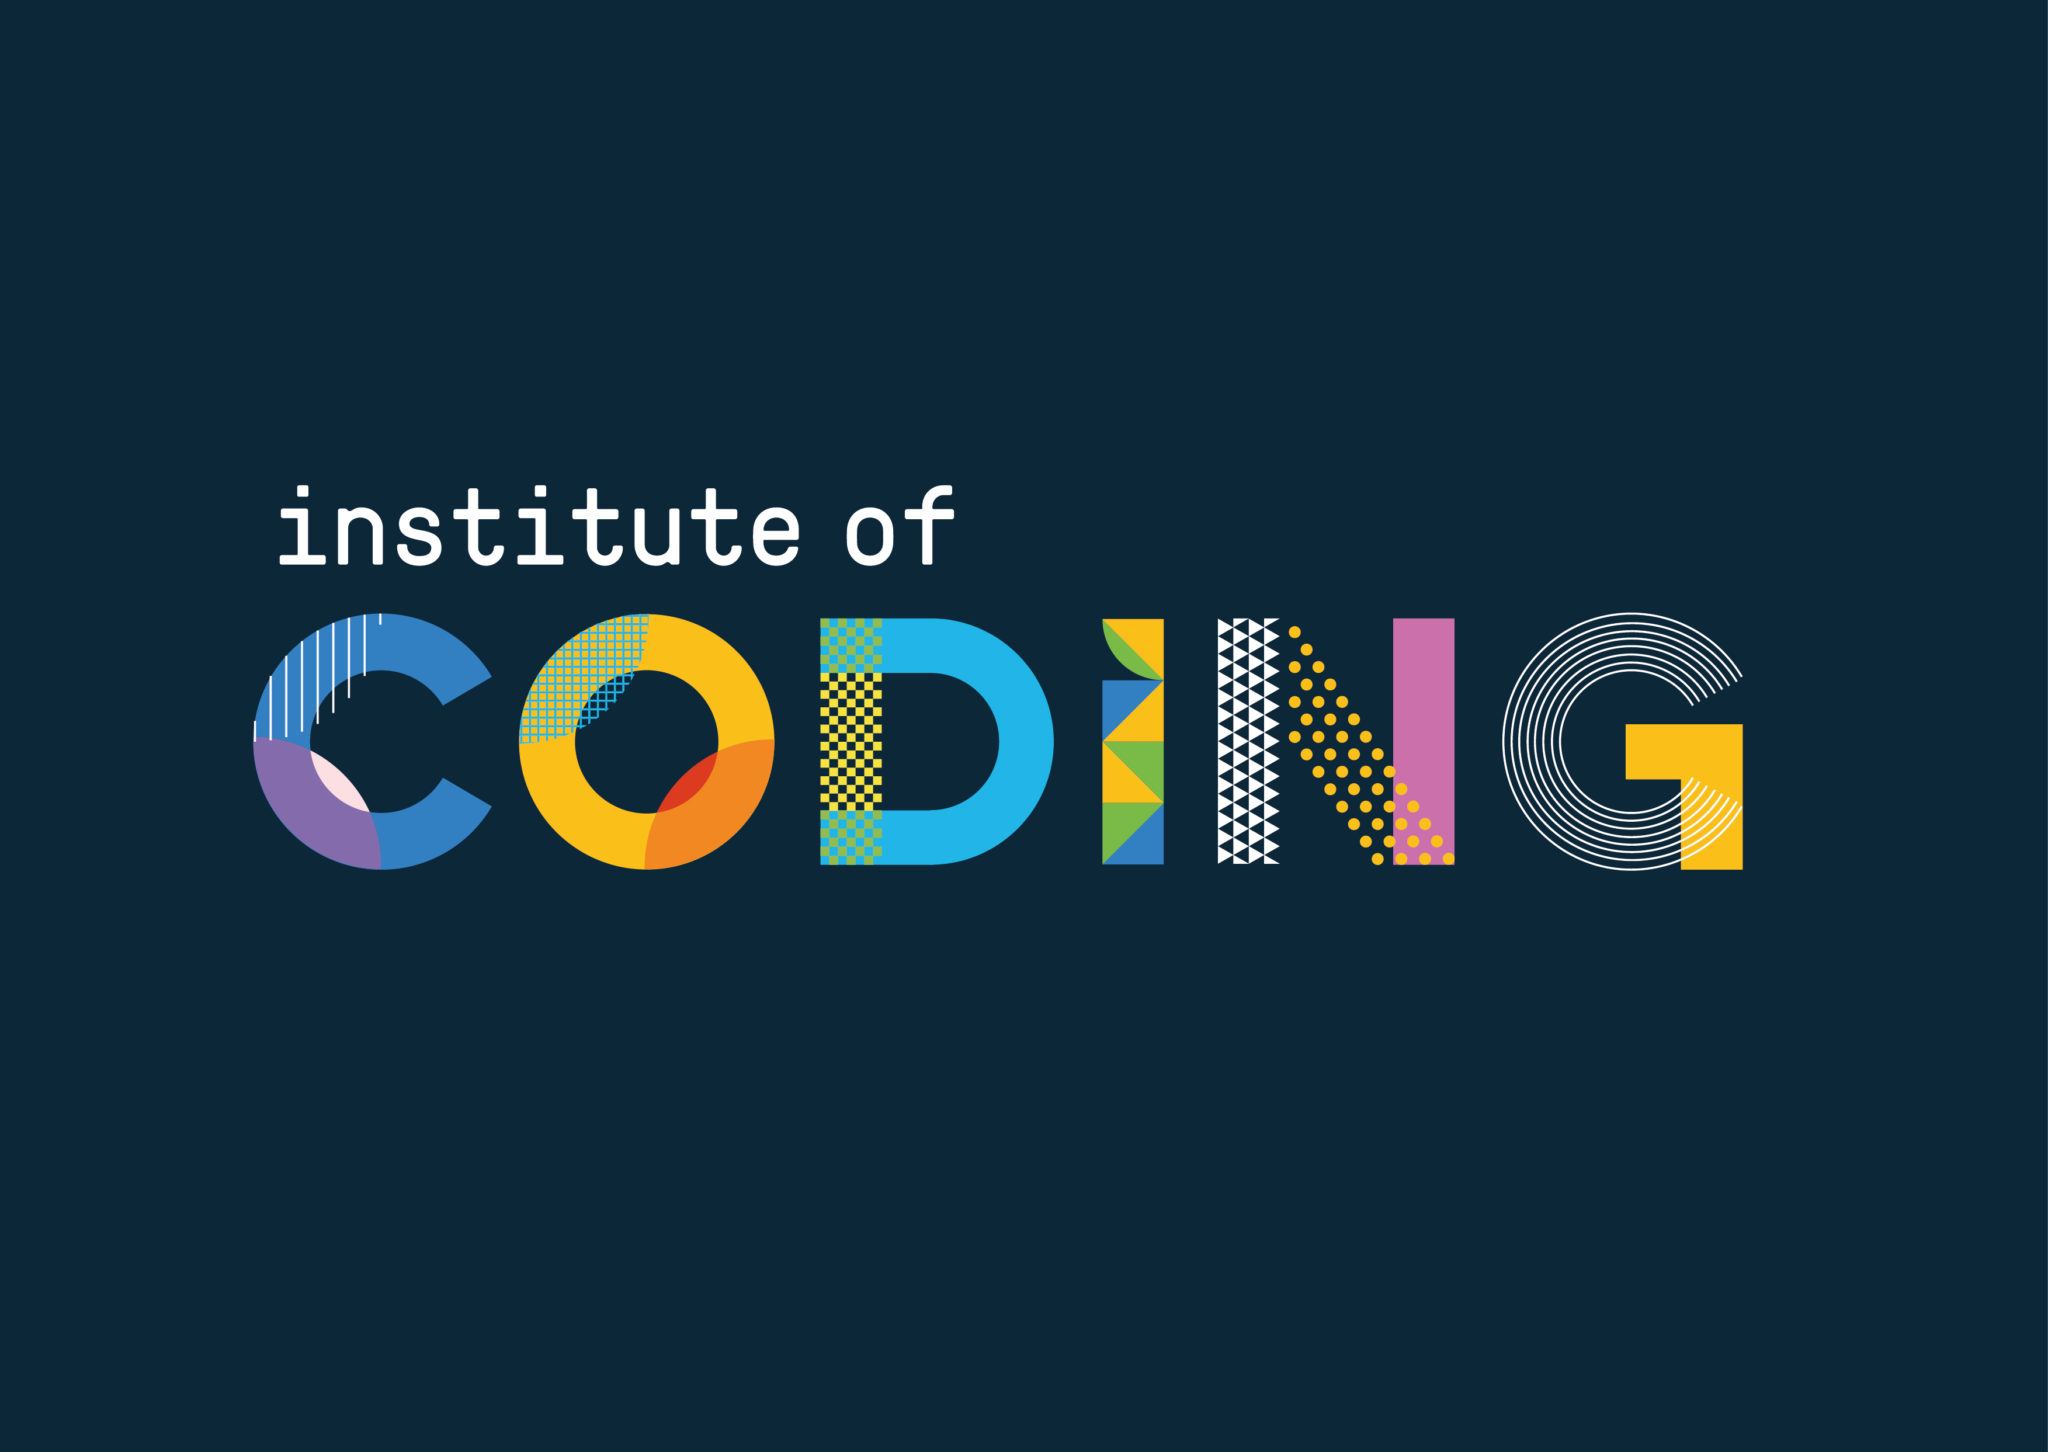 Getting Britain ‘on the front foot’ with the Institute of Coding